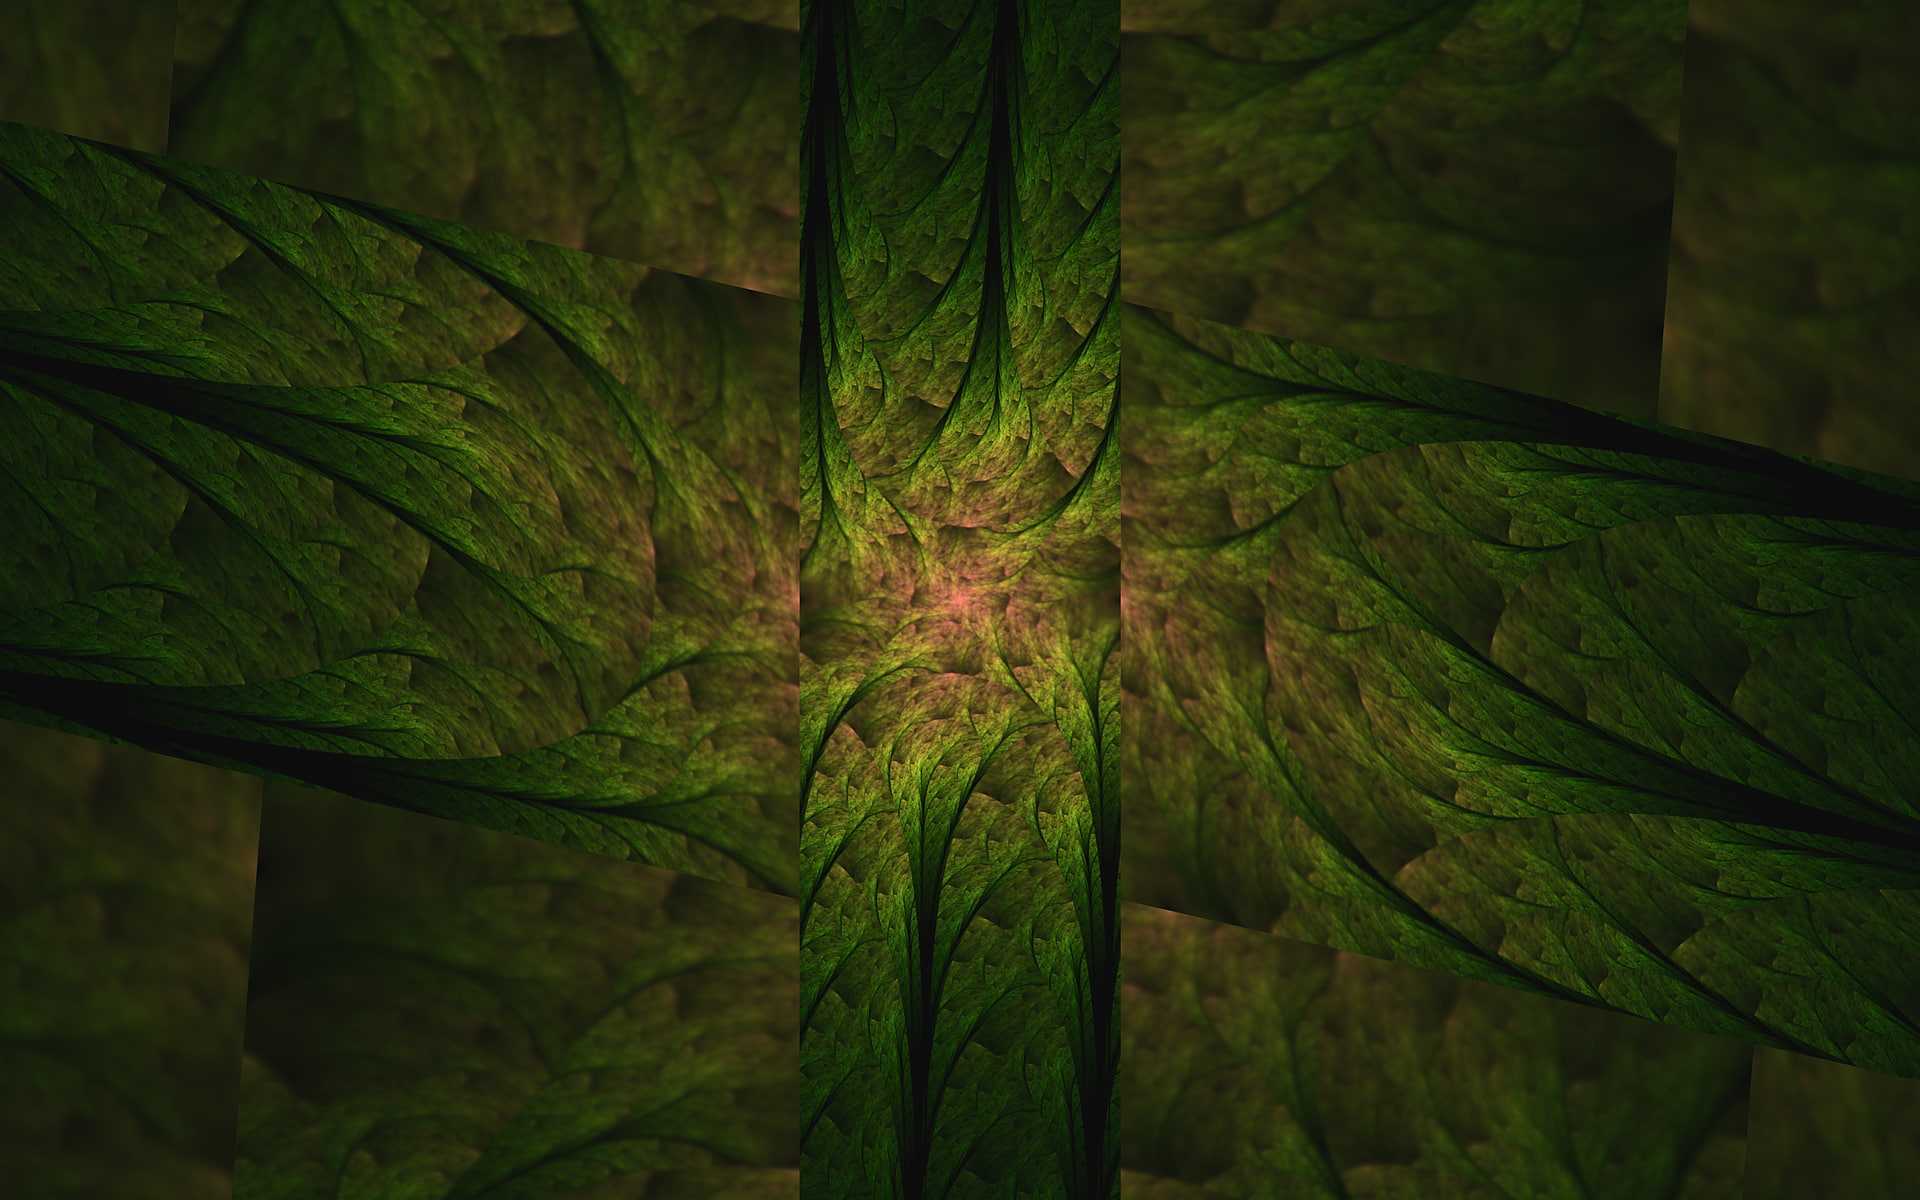 abstract, fractal, digital art, green color, growth, plant